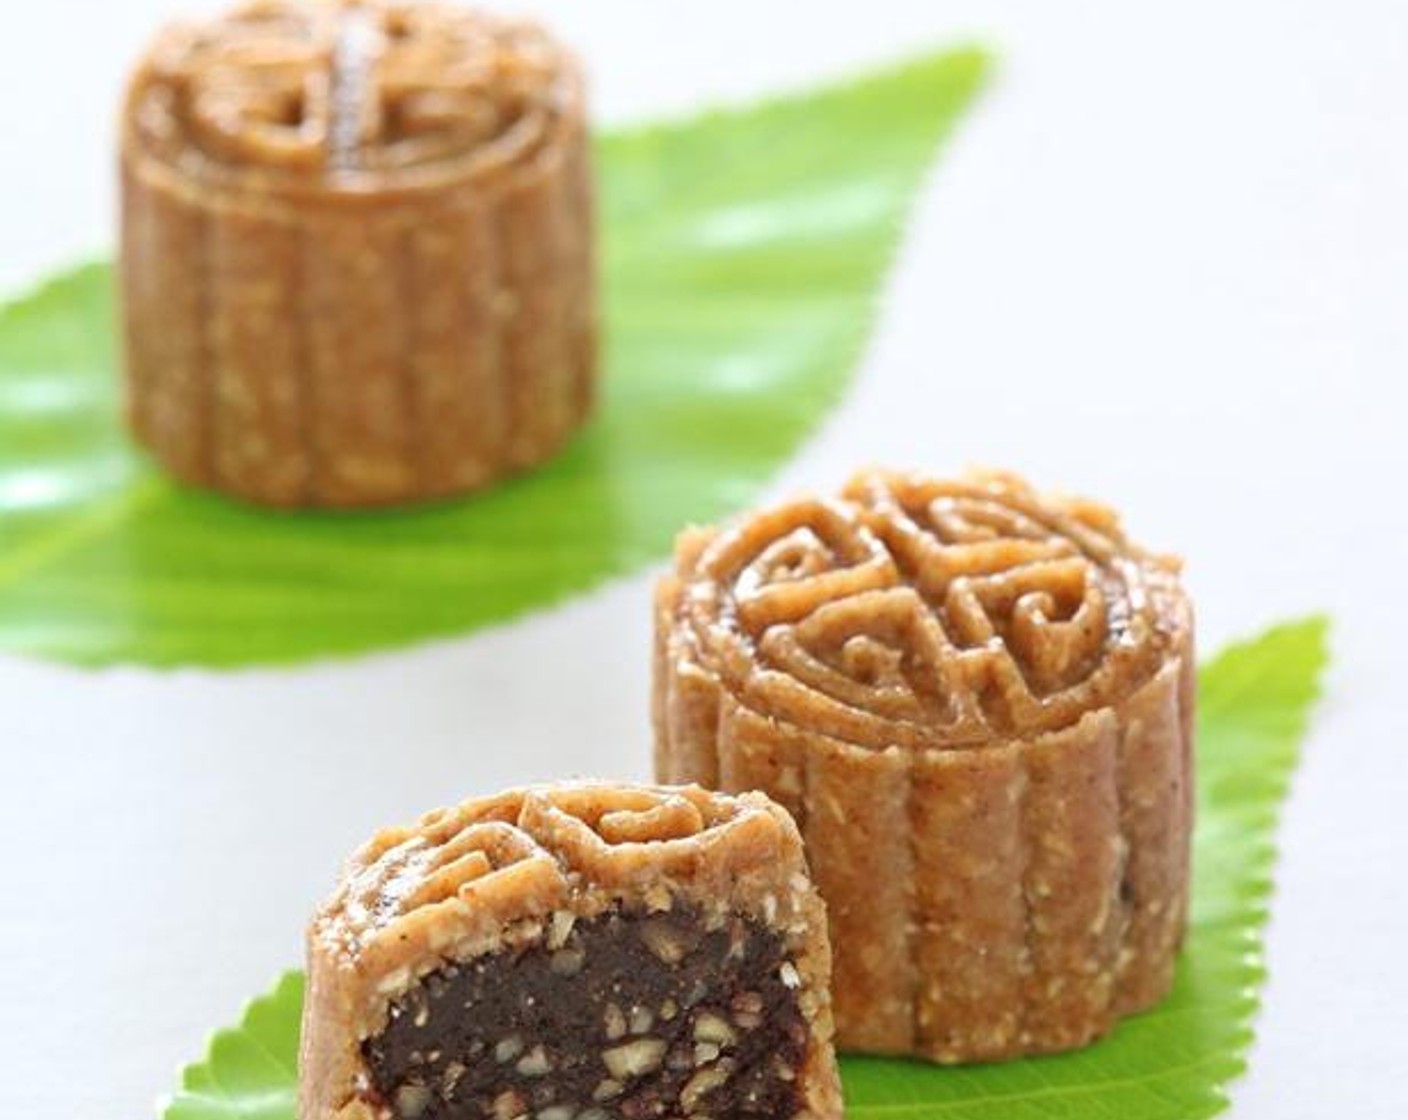 step 4 Store the mooncakes in the refrigerator for at least one hour before consuming them. Enjoy!